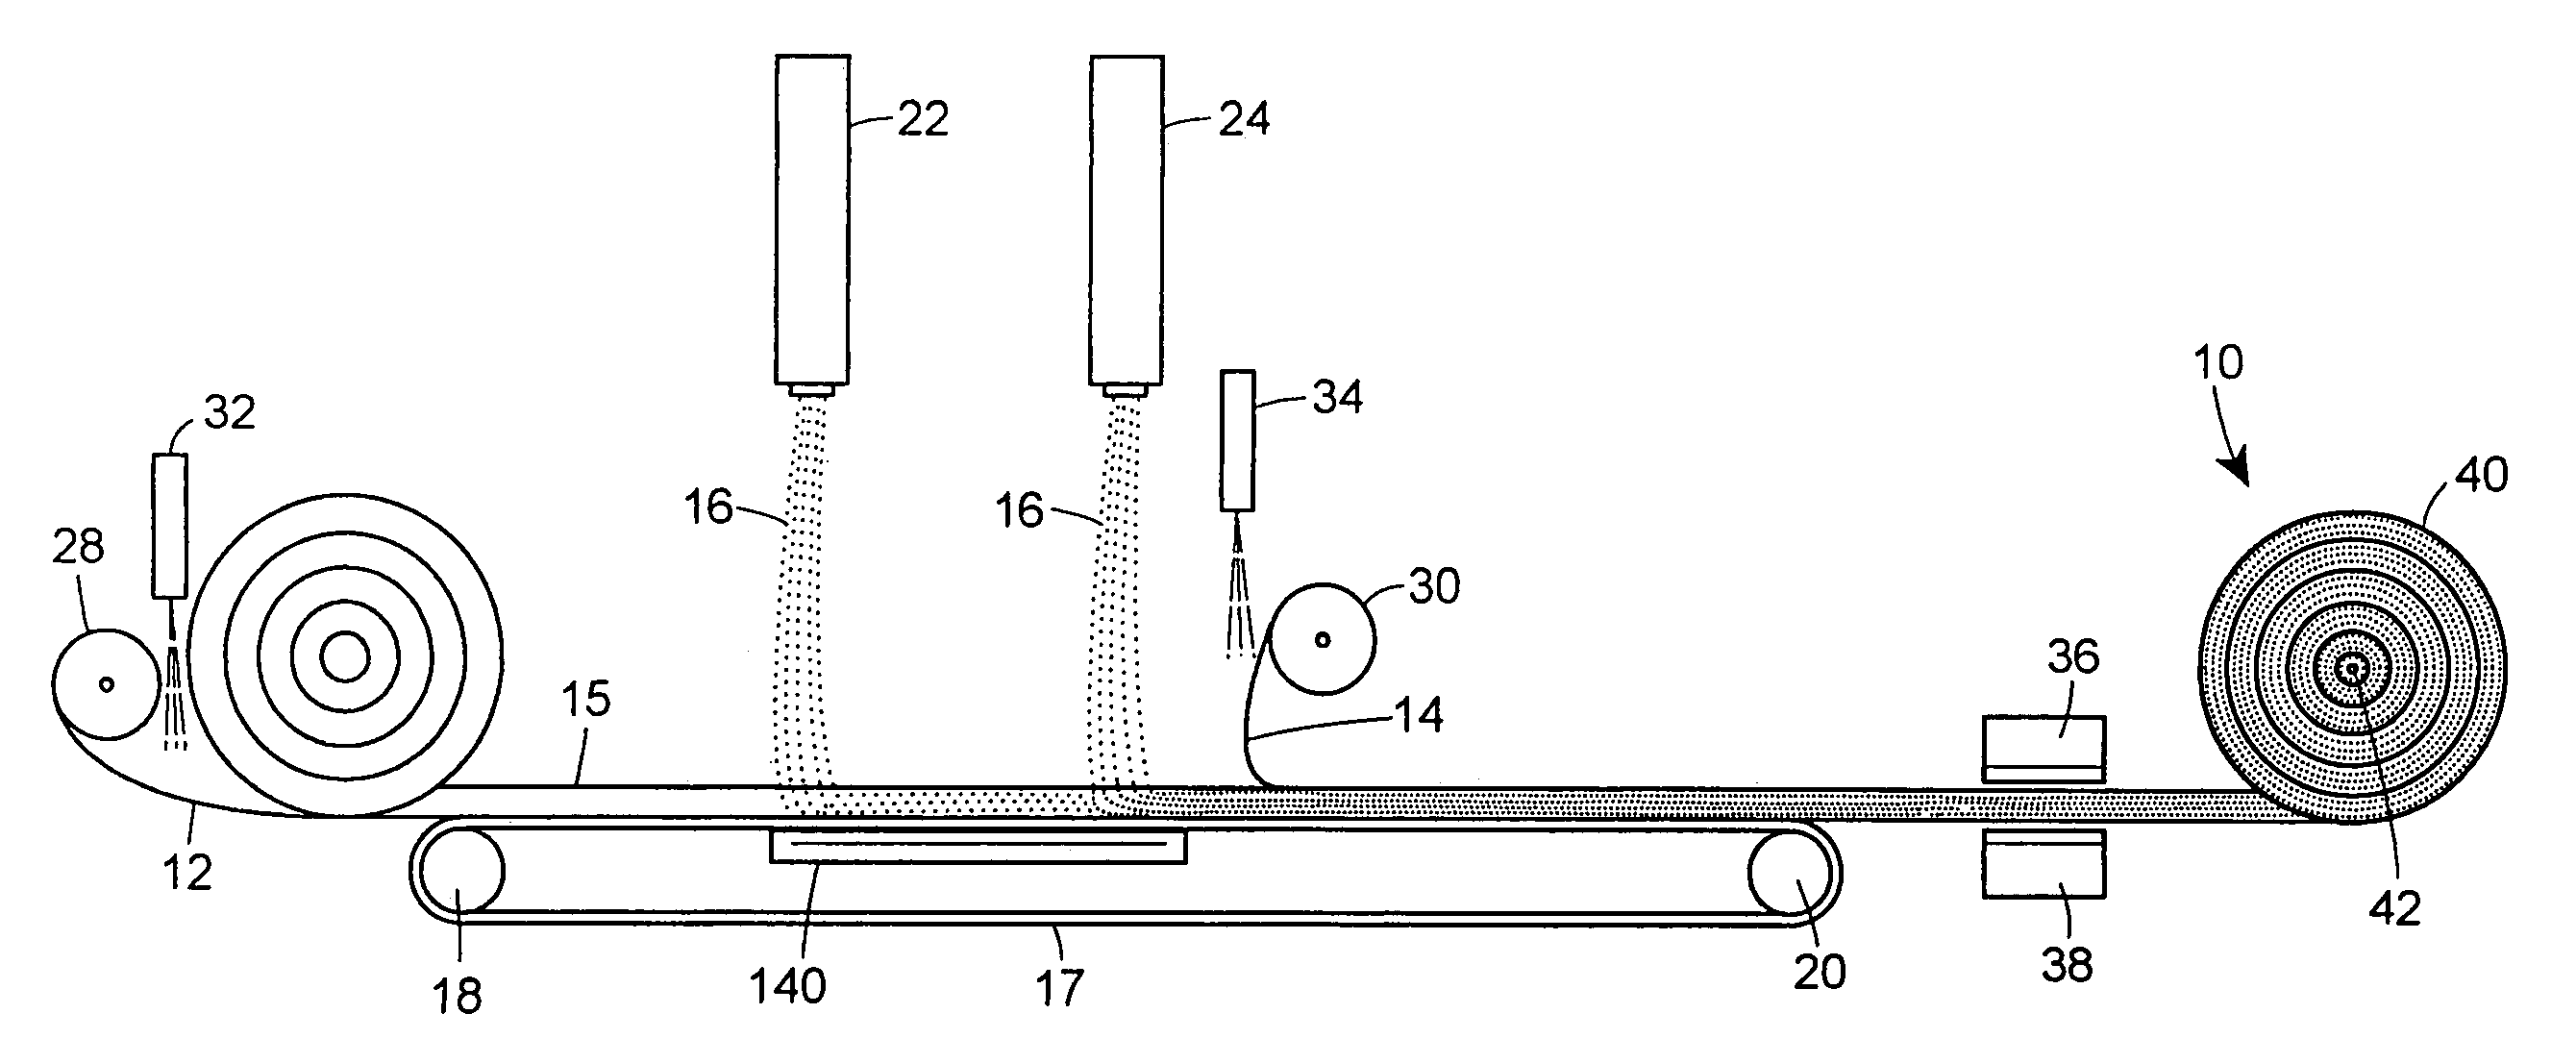 Bioremediation mat and method of manufacture and use